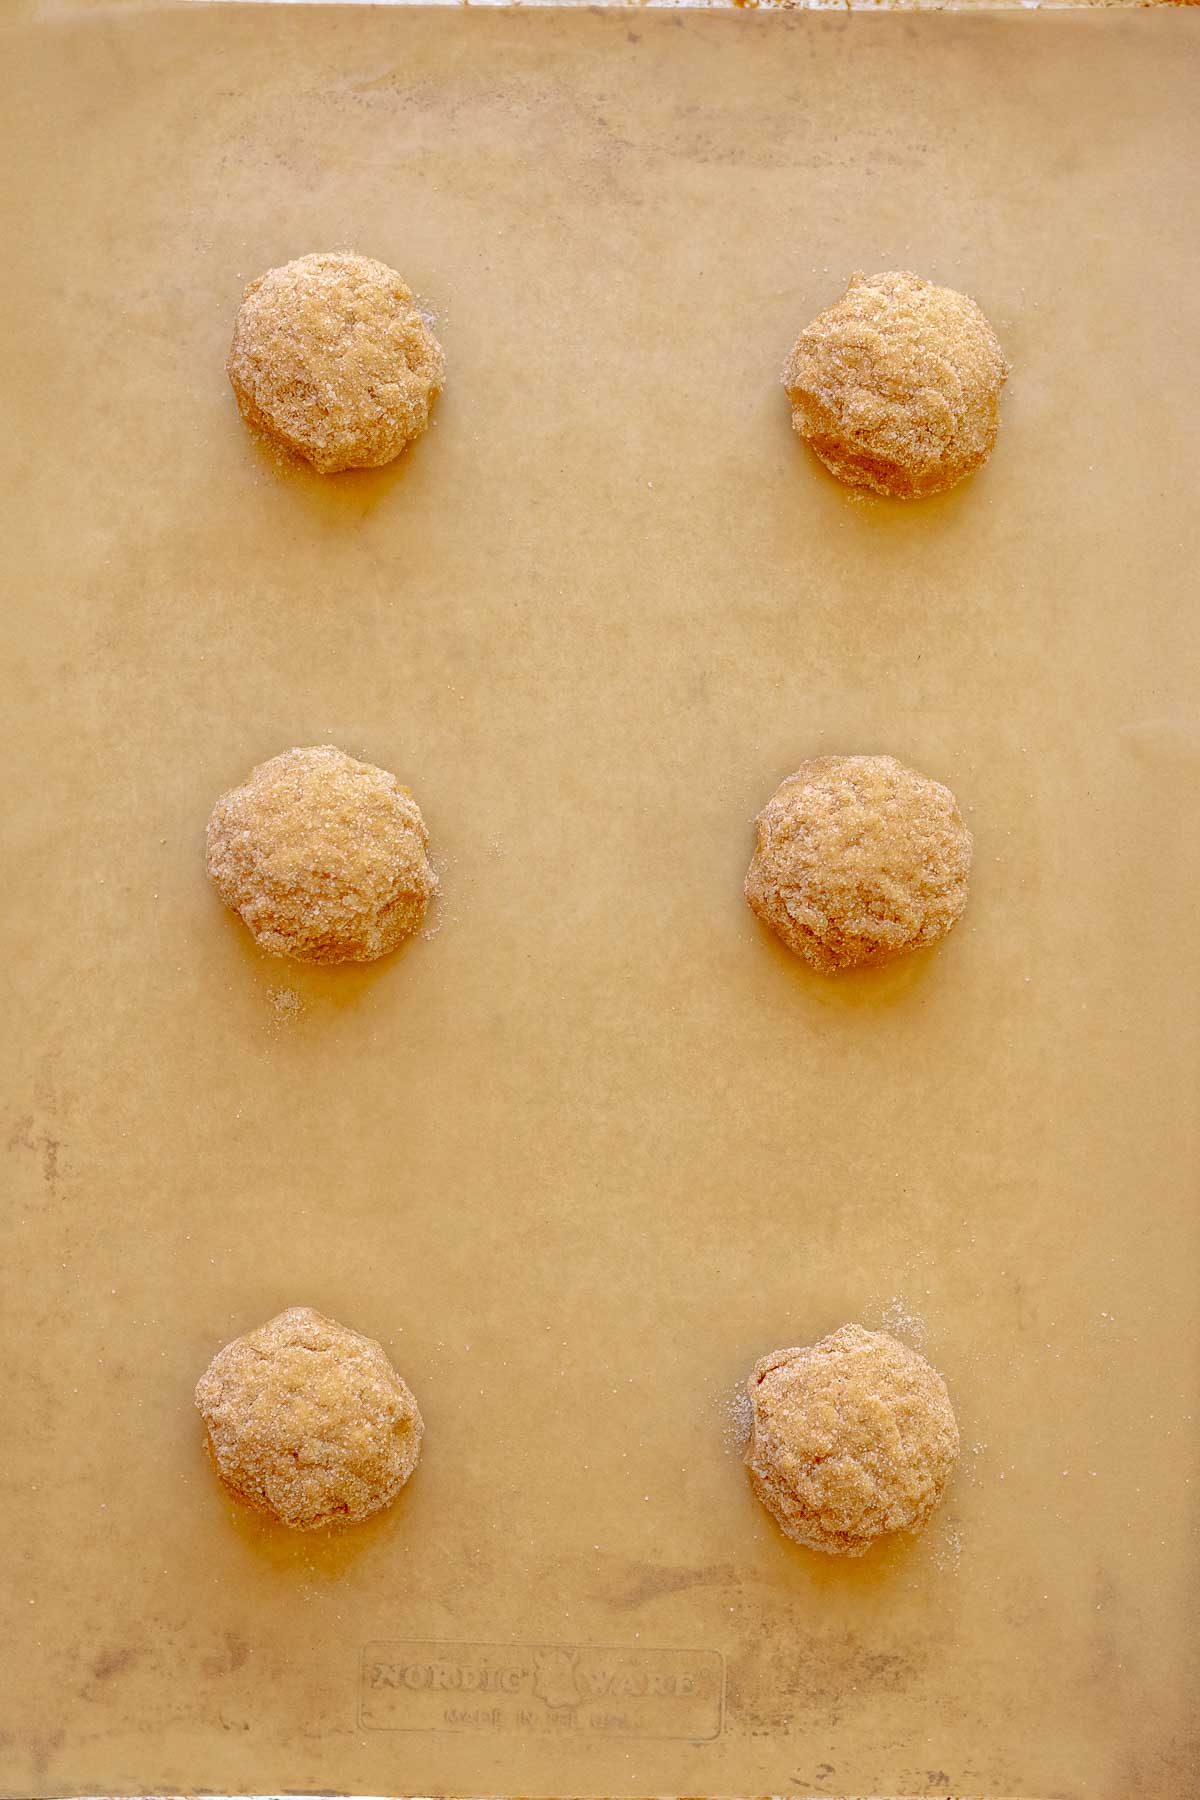 Pumpkin cookies arranged on a baking sheet lined with parchment paper.